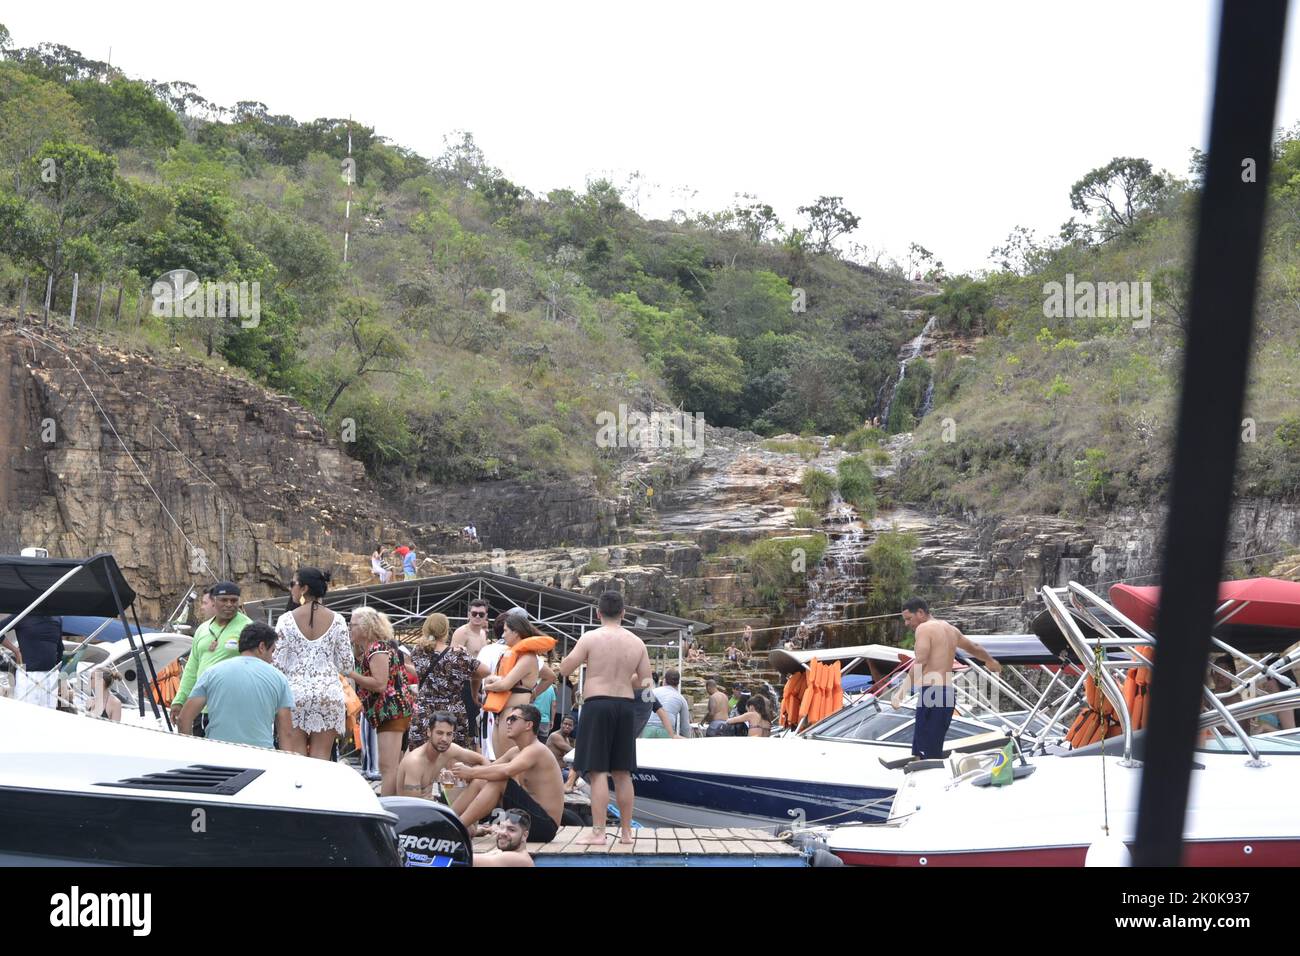 Tourists having fun on a speedboat ride, with several boats anchored, Brazil, South America, panoramic photo Stock Photo